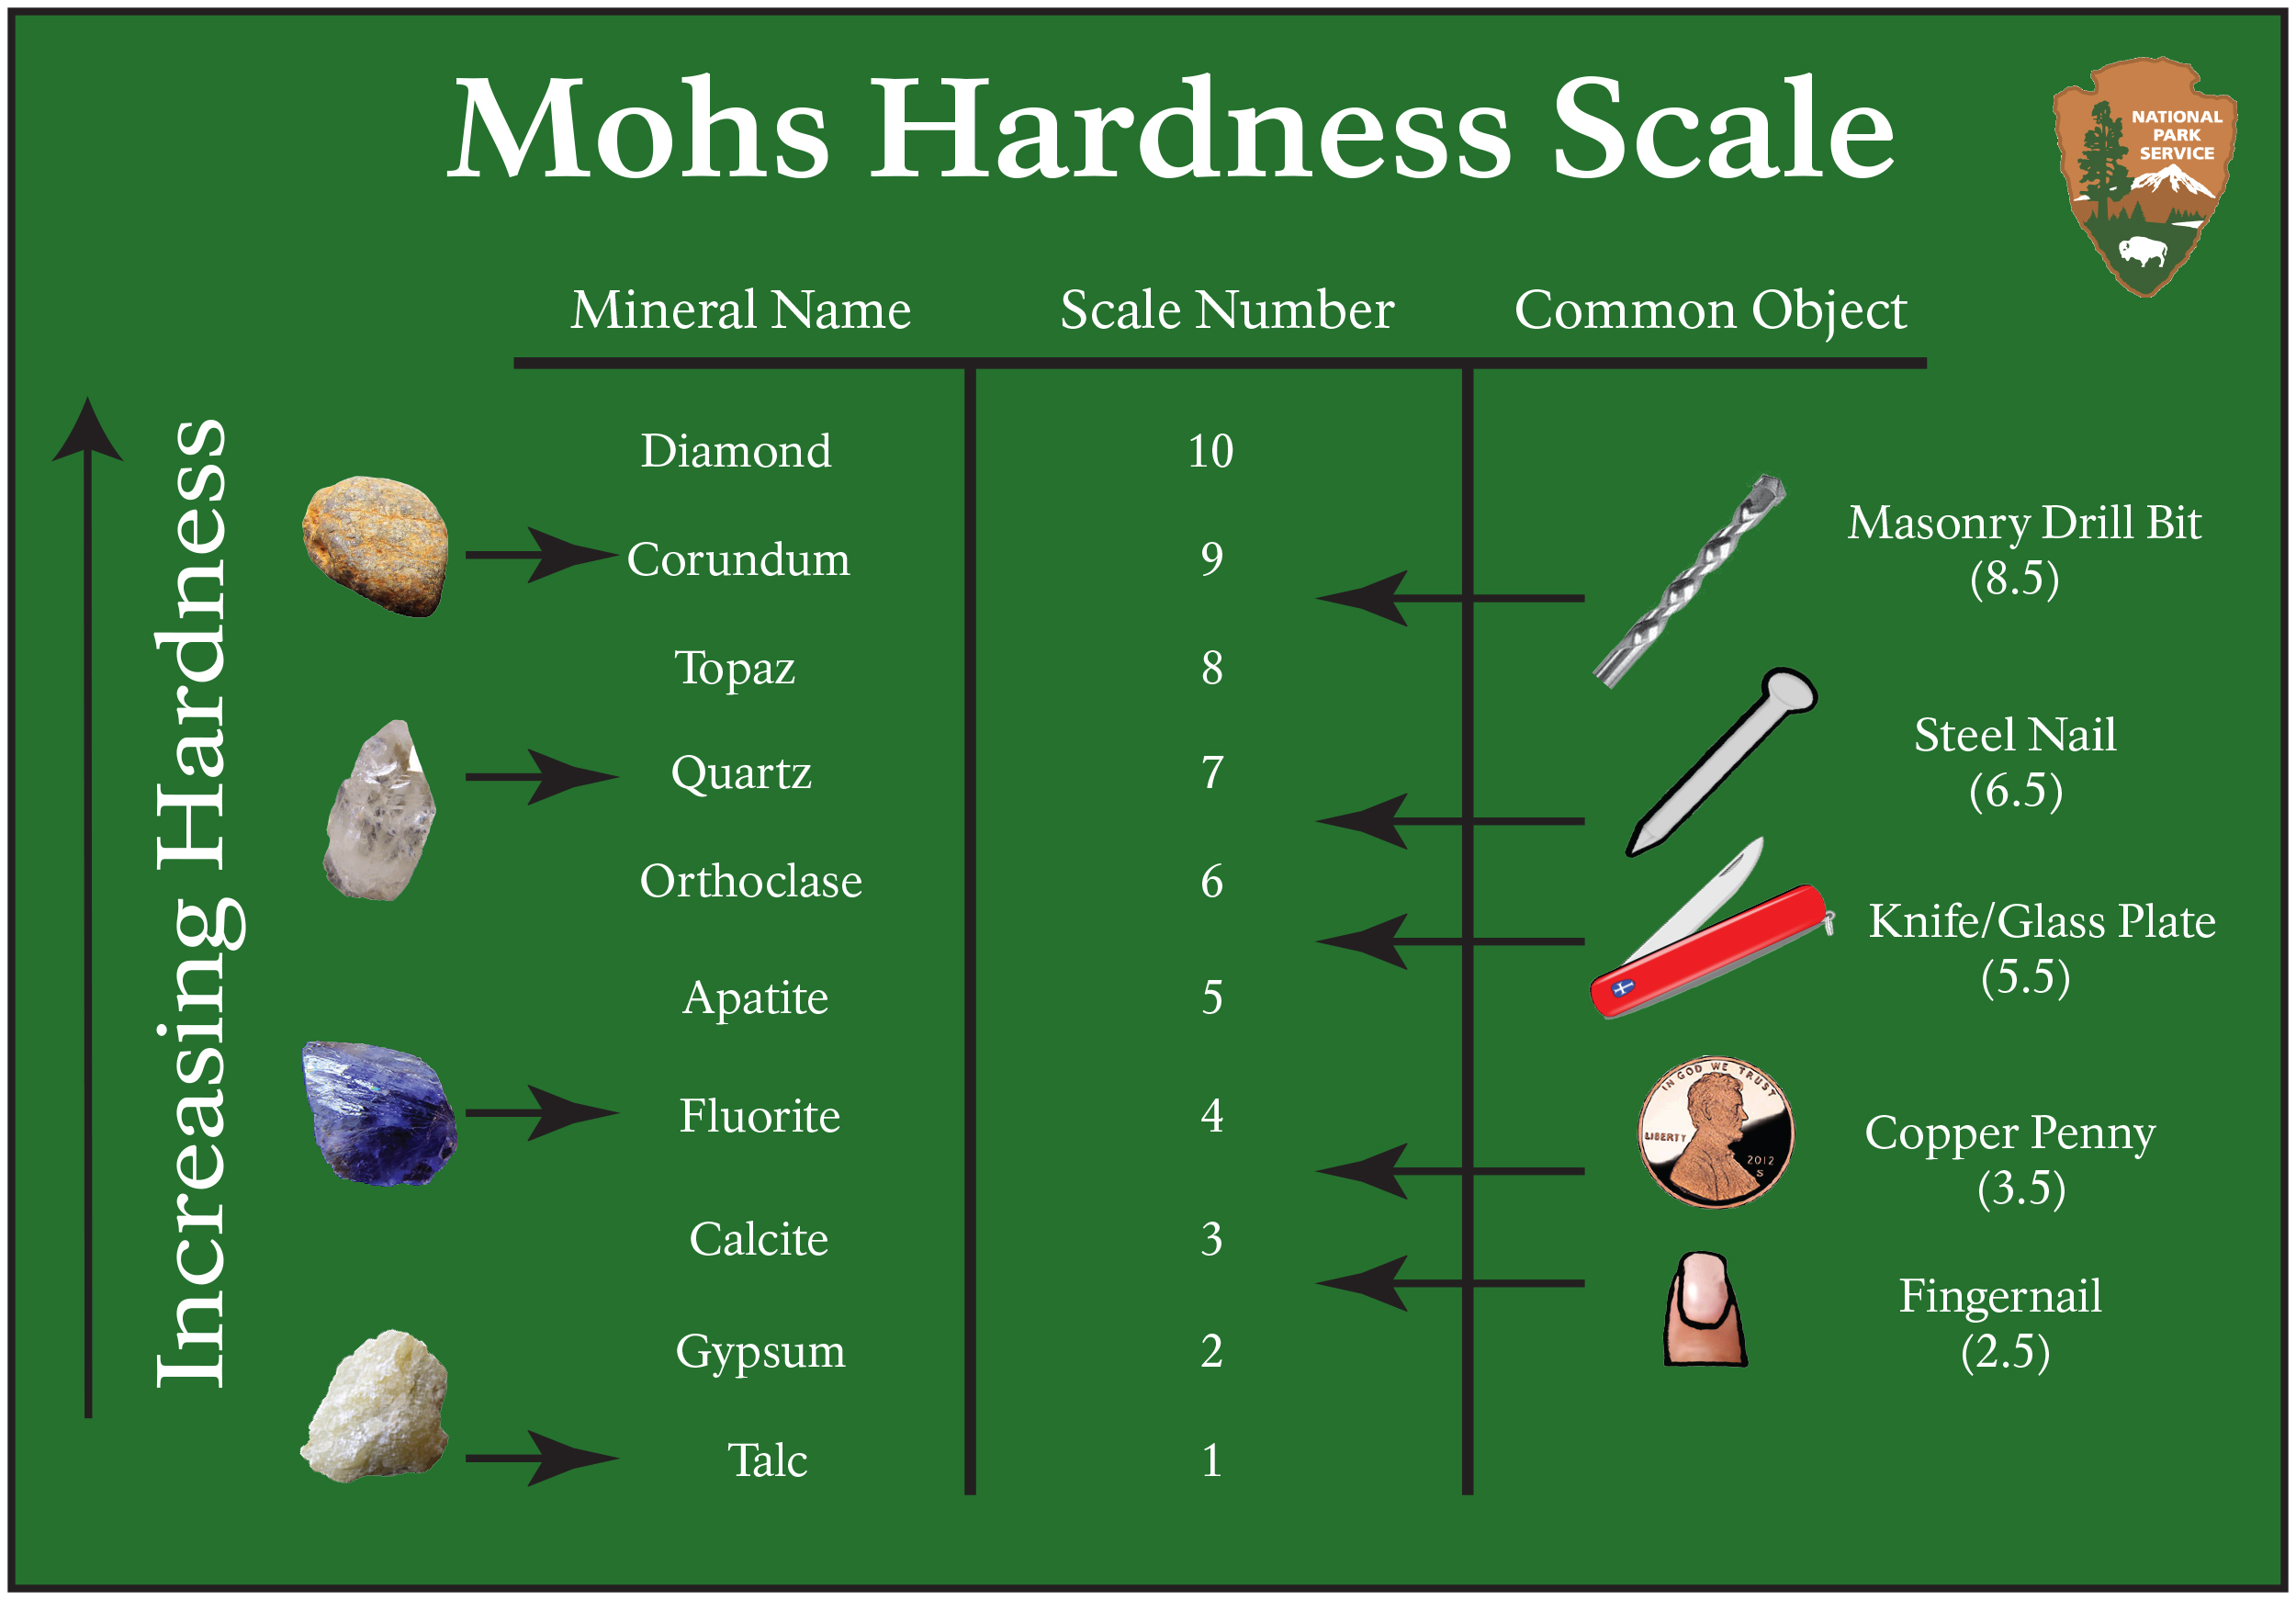 Mohs Hardness Scale (U.S. National Park Service)